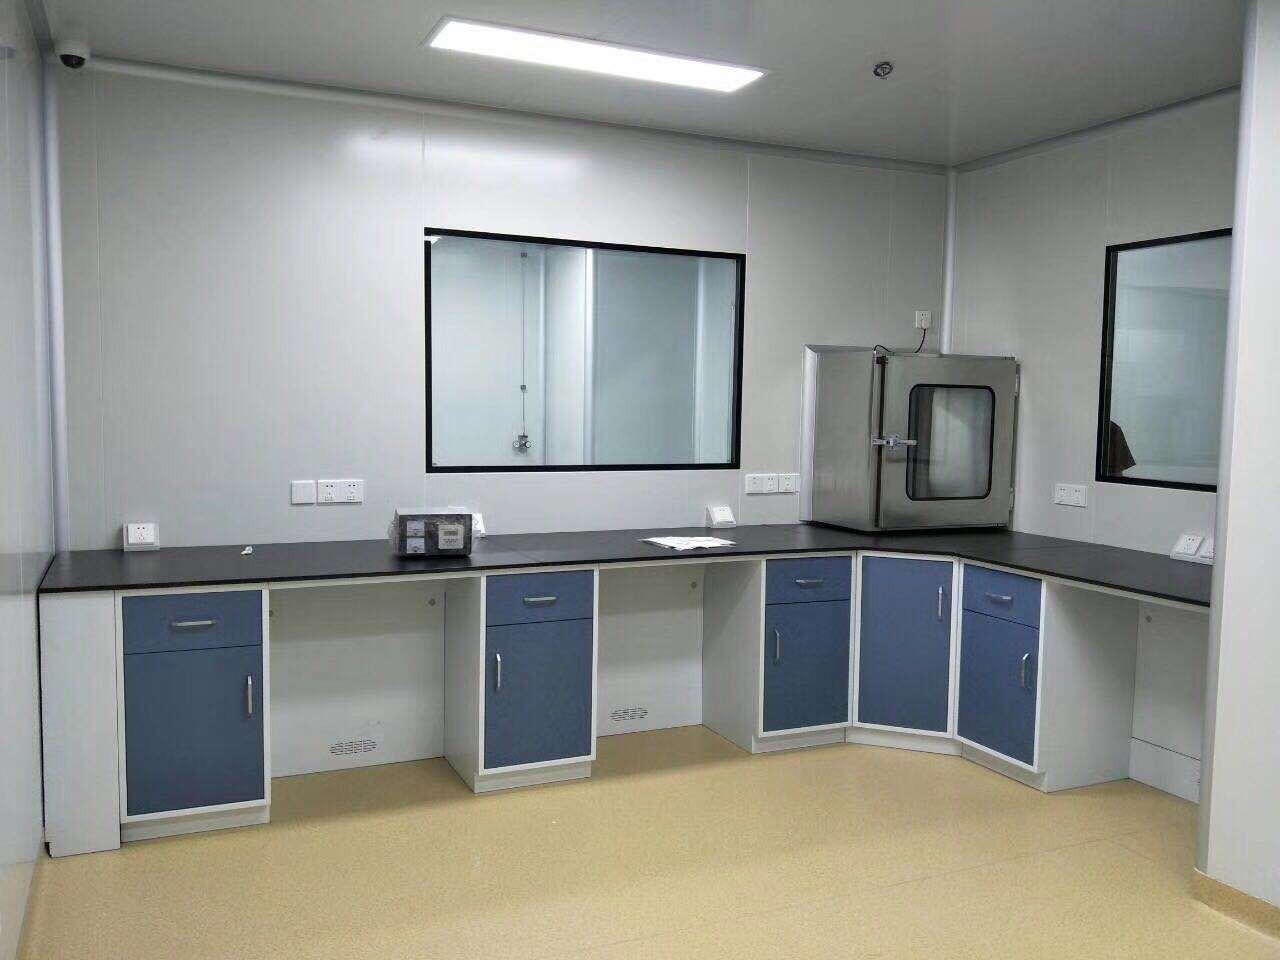 >Design layout requirements and planning scheme of pathology laboratory in hospital